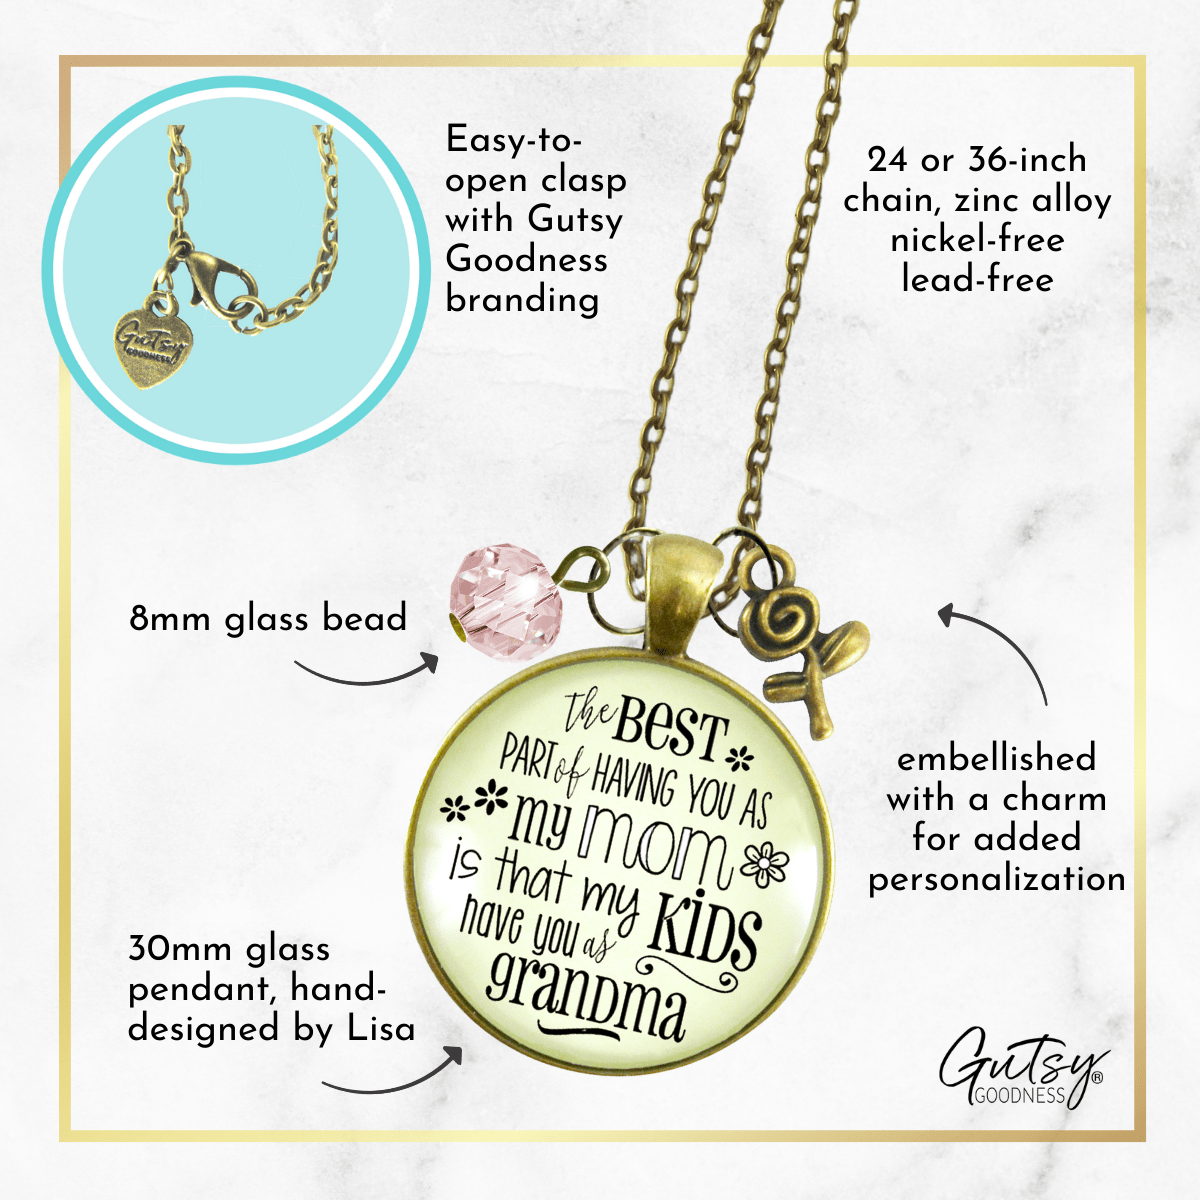 Gutsy Goodness Grandma Necklace Best Part You as Mom Kids Jewelry Gift Daughter - Gutsy Goodness Handmade Jewelry;Grandma Necklace Best Part You As Mom Kids Jewelry Gift Daughter - Gutsy Goodness Handmade Jewelry Gifts